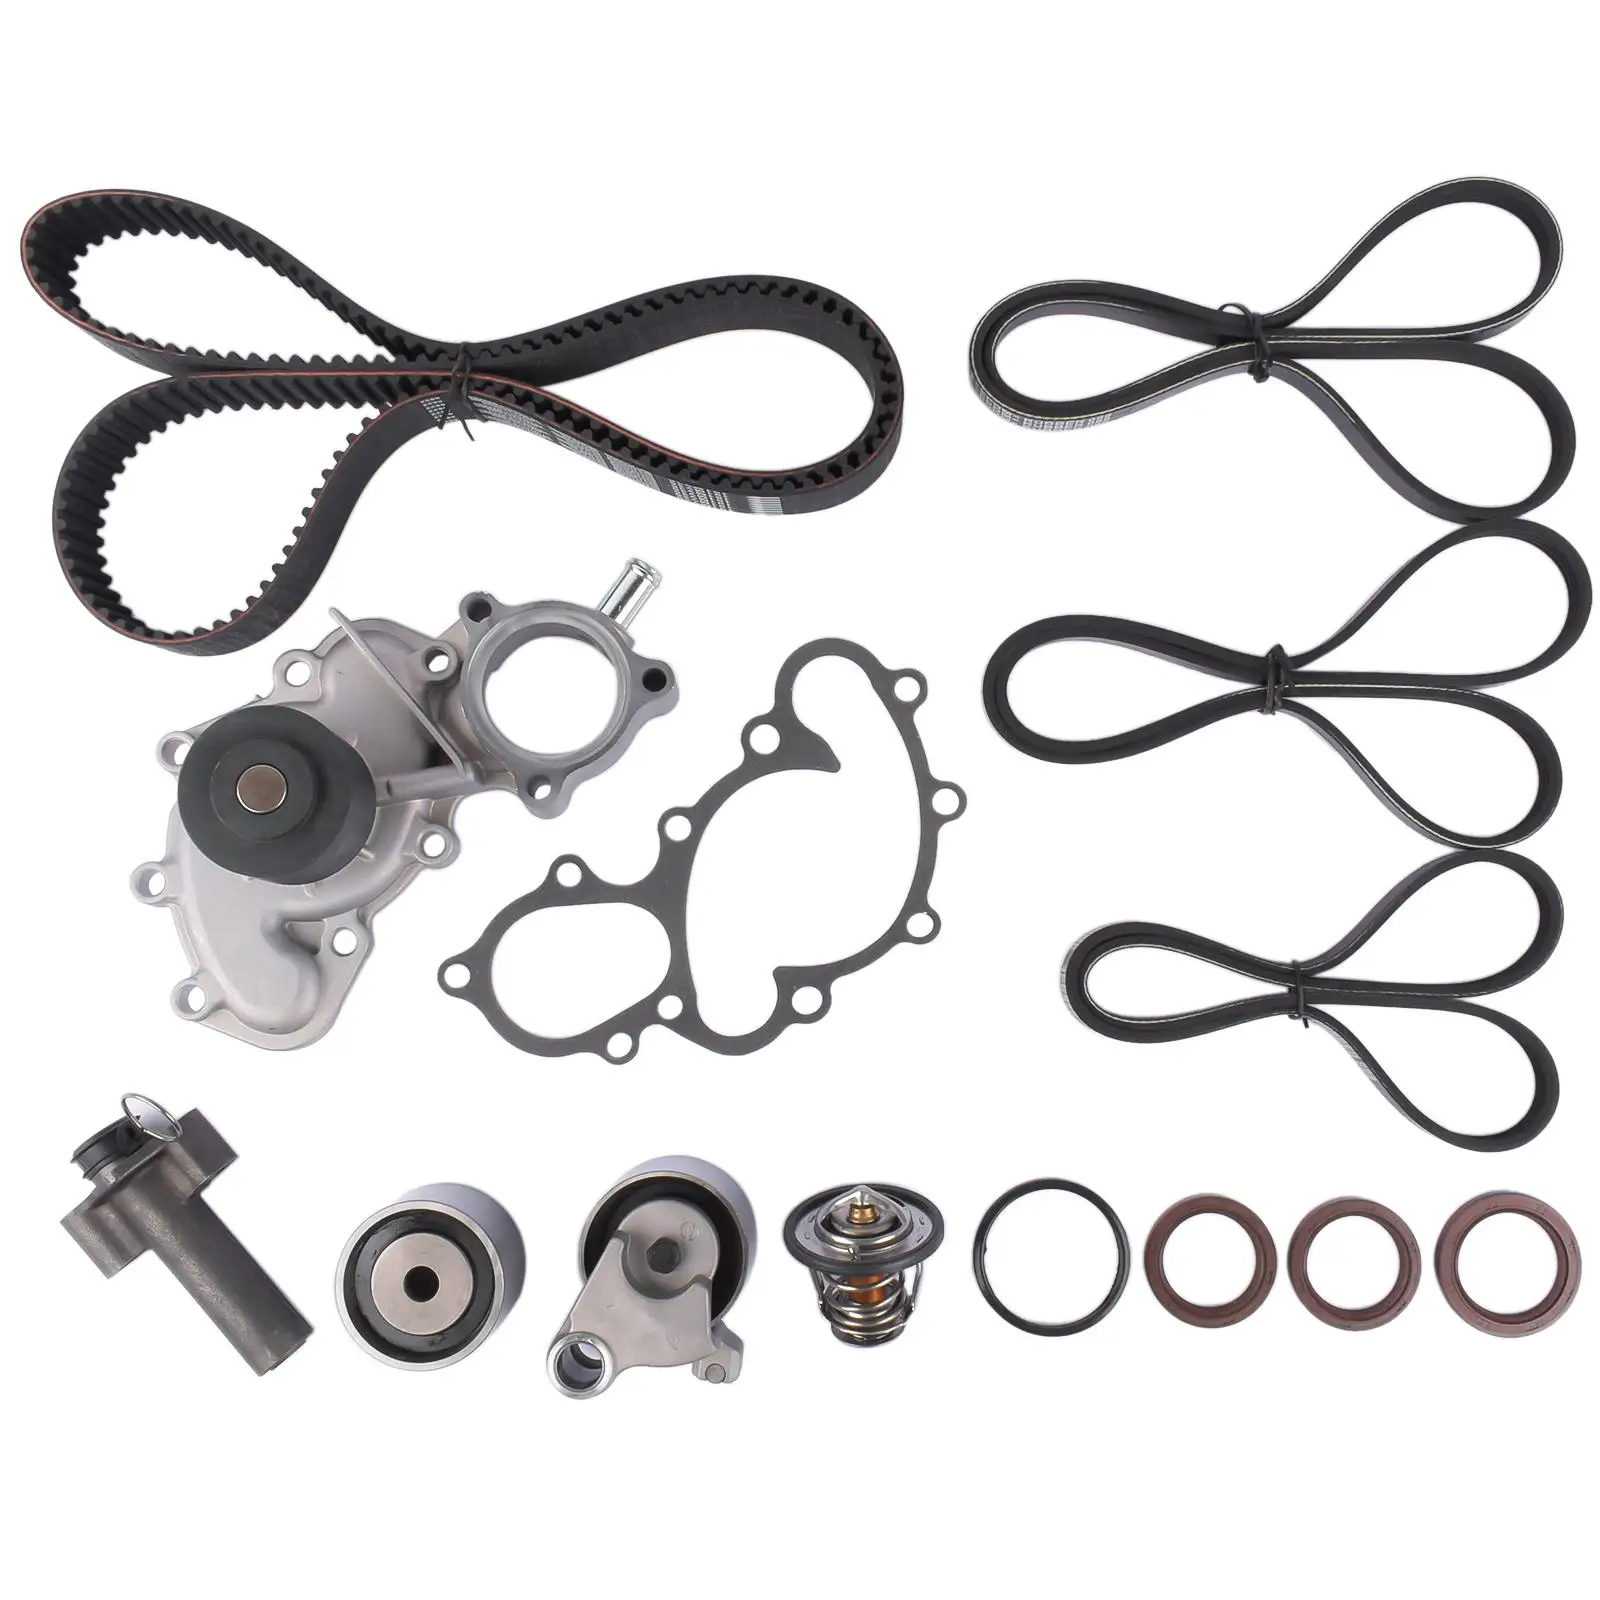 

AP01 Water Pump Timing Belt Kit For Toyota 4Runner Tacoma T100 Tundra 5VZFE 2WD & 4WD